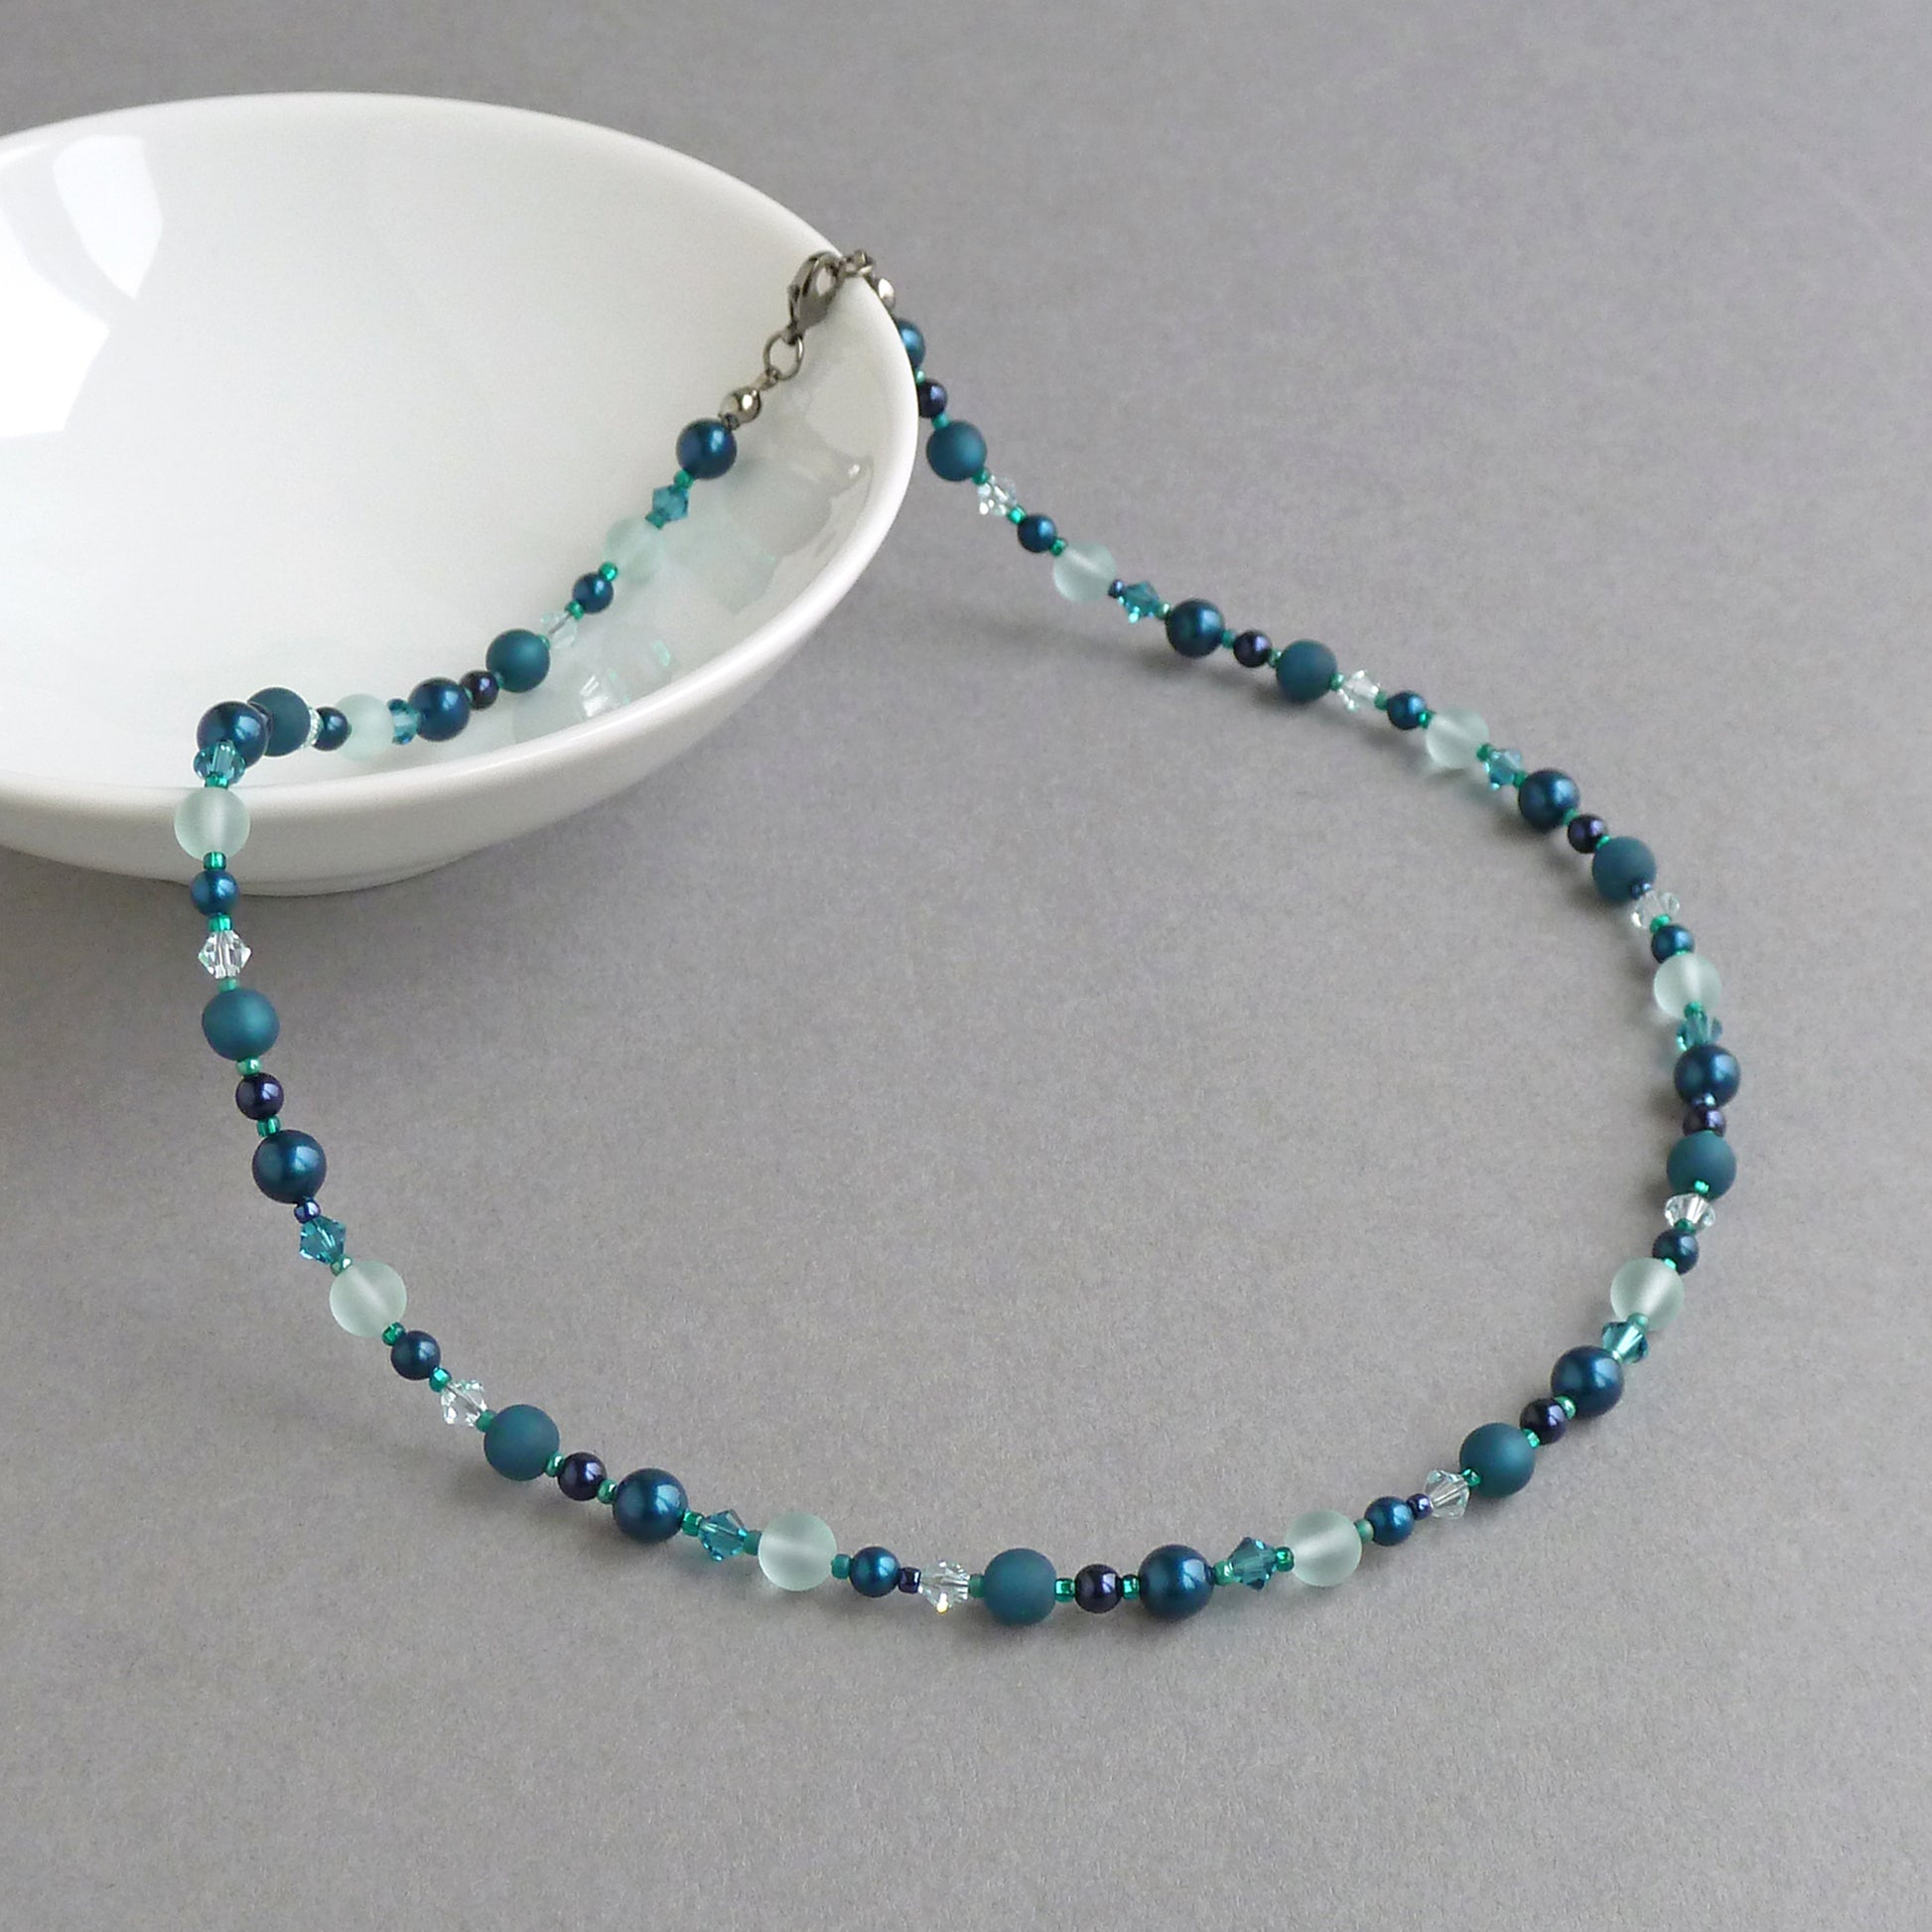 Teal beaded necklace made with pearls and crystals.